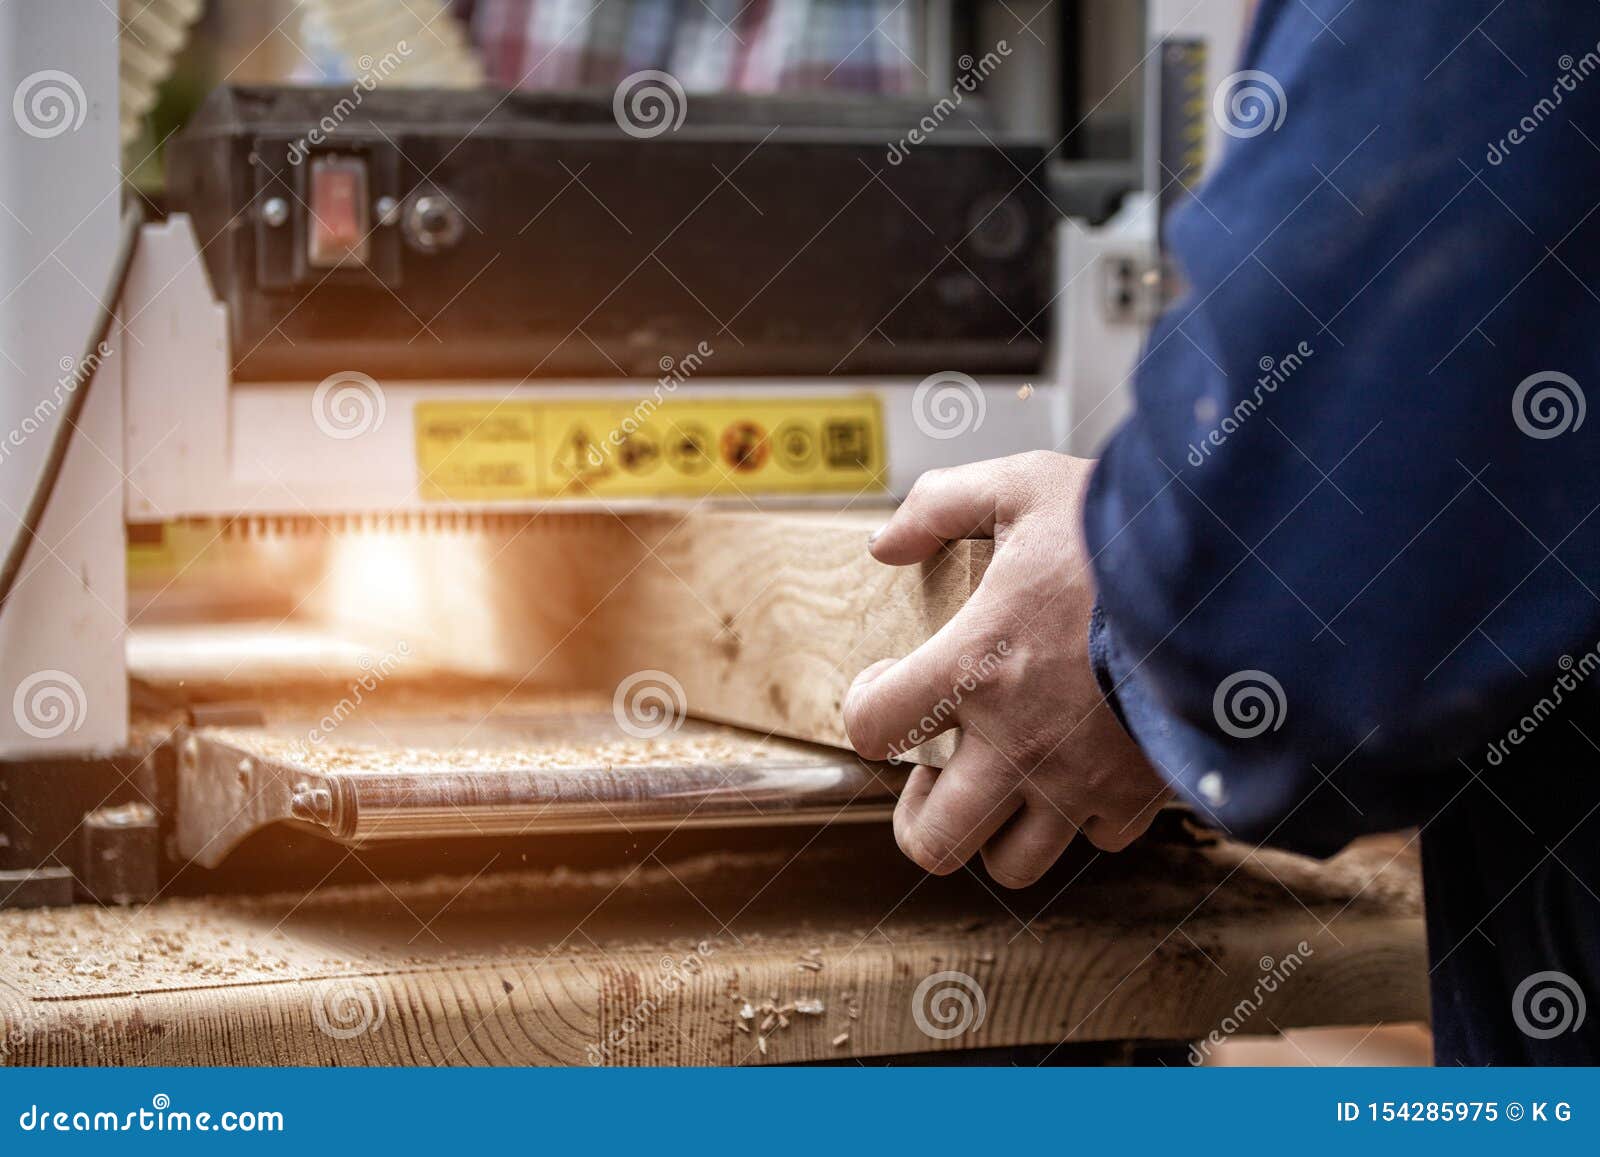 Craftsman Woodworking At Carpentry With Lots Of Modern Professional Power Tools Man Using Thicknessing Machine And Circular Saw Stock Image Image Of Planer Machine 154285975,Chair And A Half With Ottoman